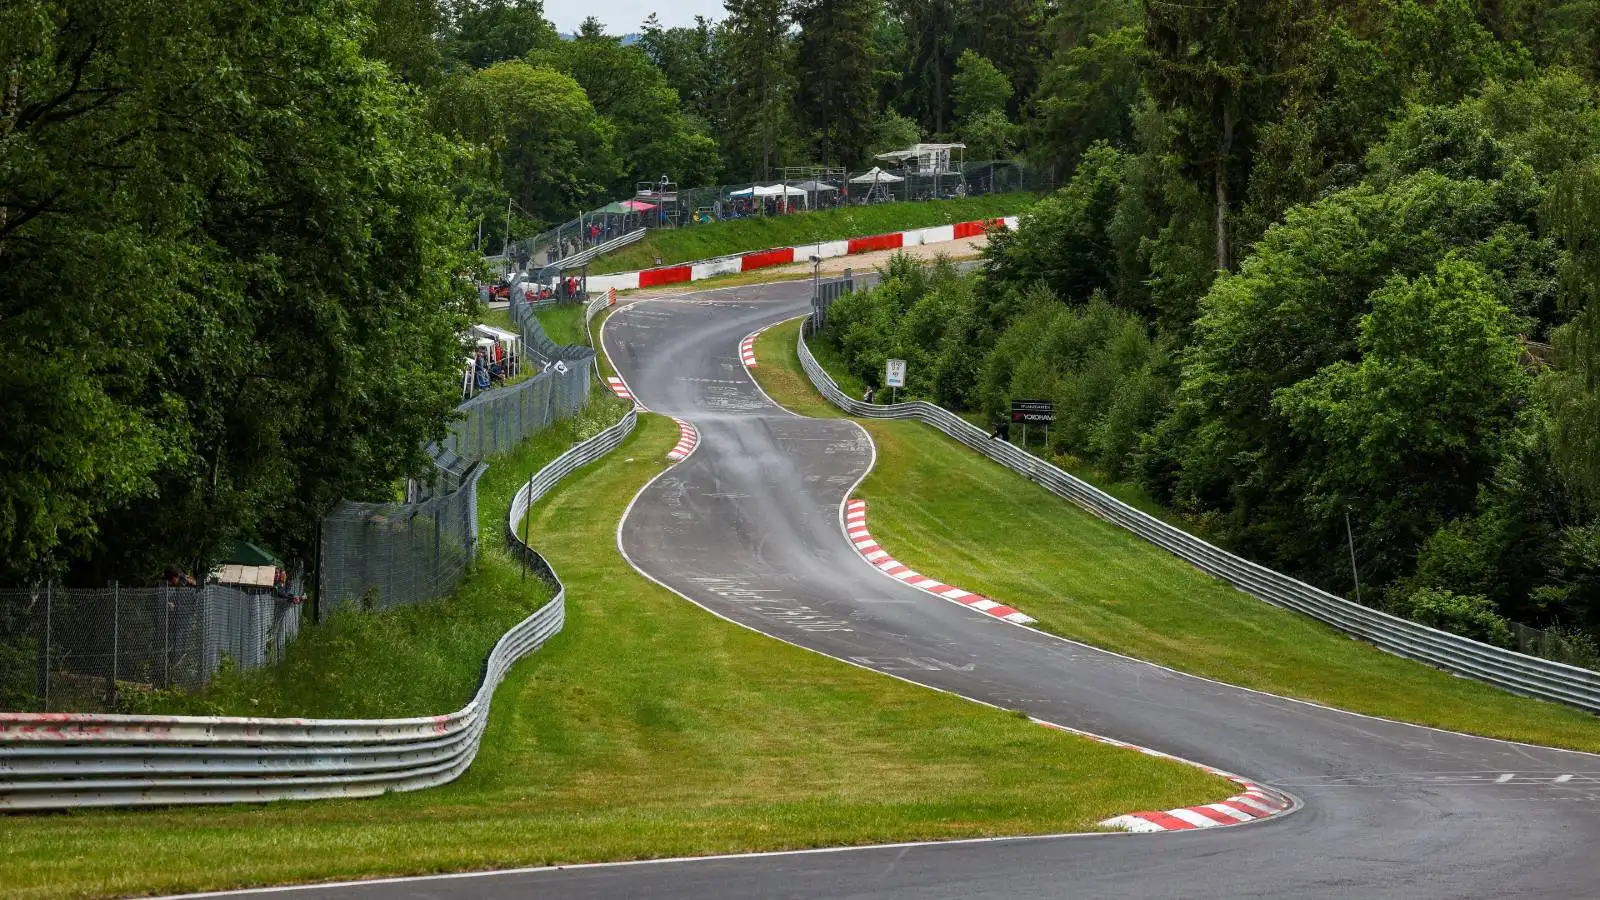 View of the Nordschleife circuit. Nurburgring May 2022.